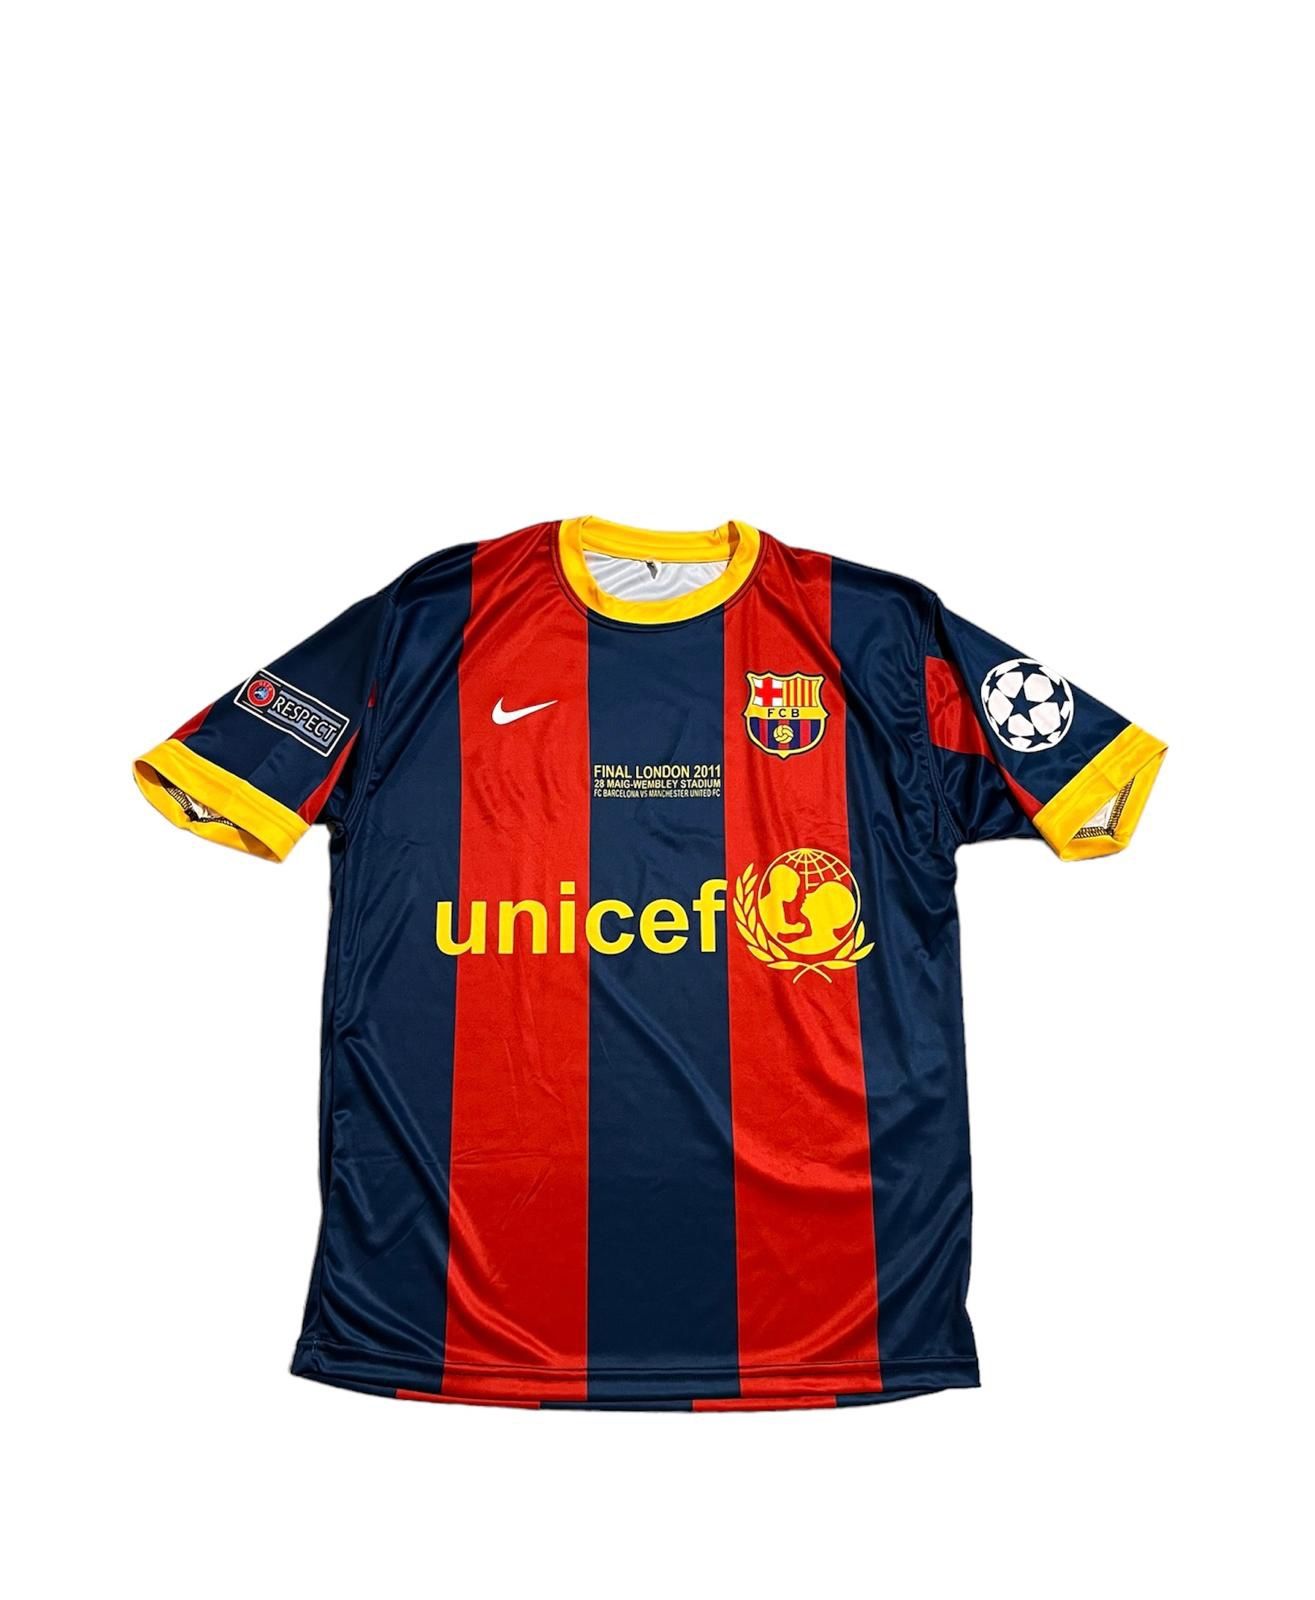 FC Barcelona 2010/11 Champions League Soccer Football JERSEY With Patches